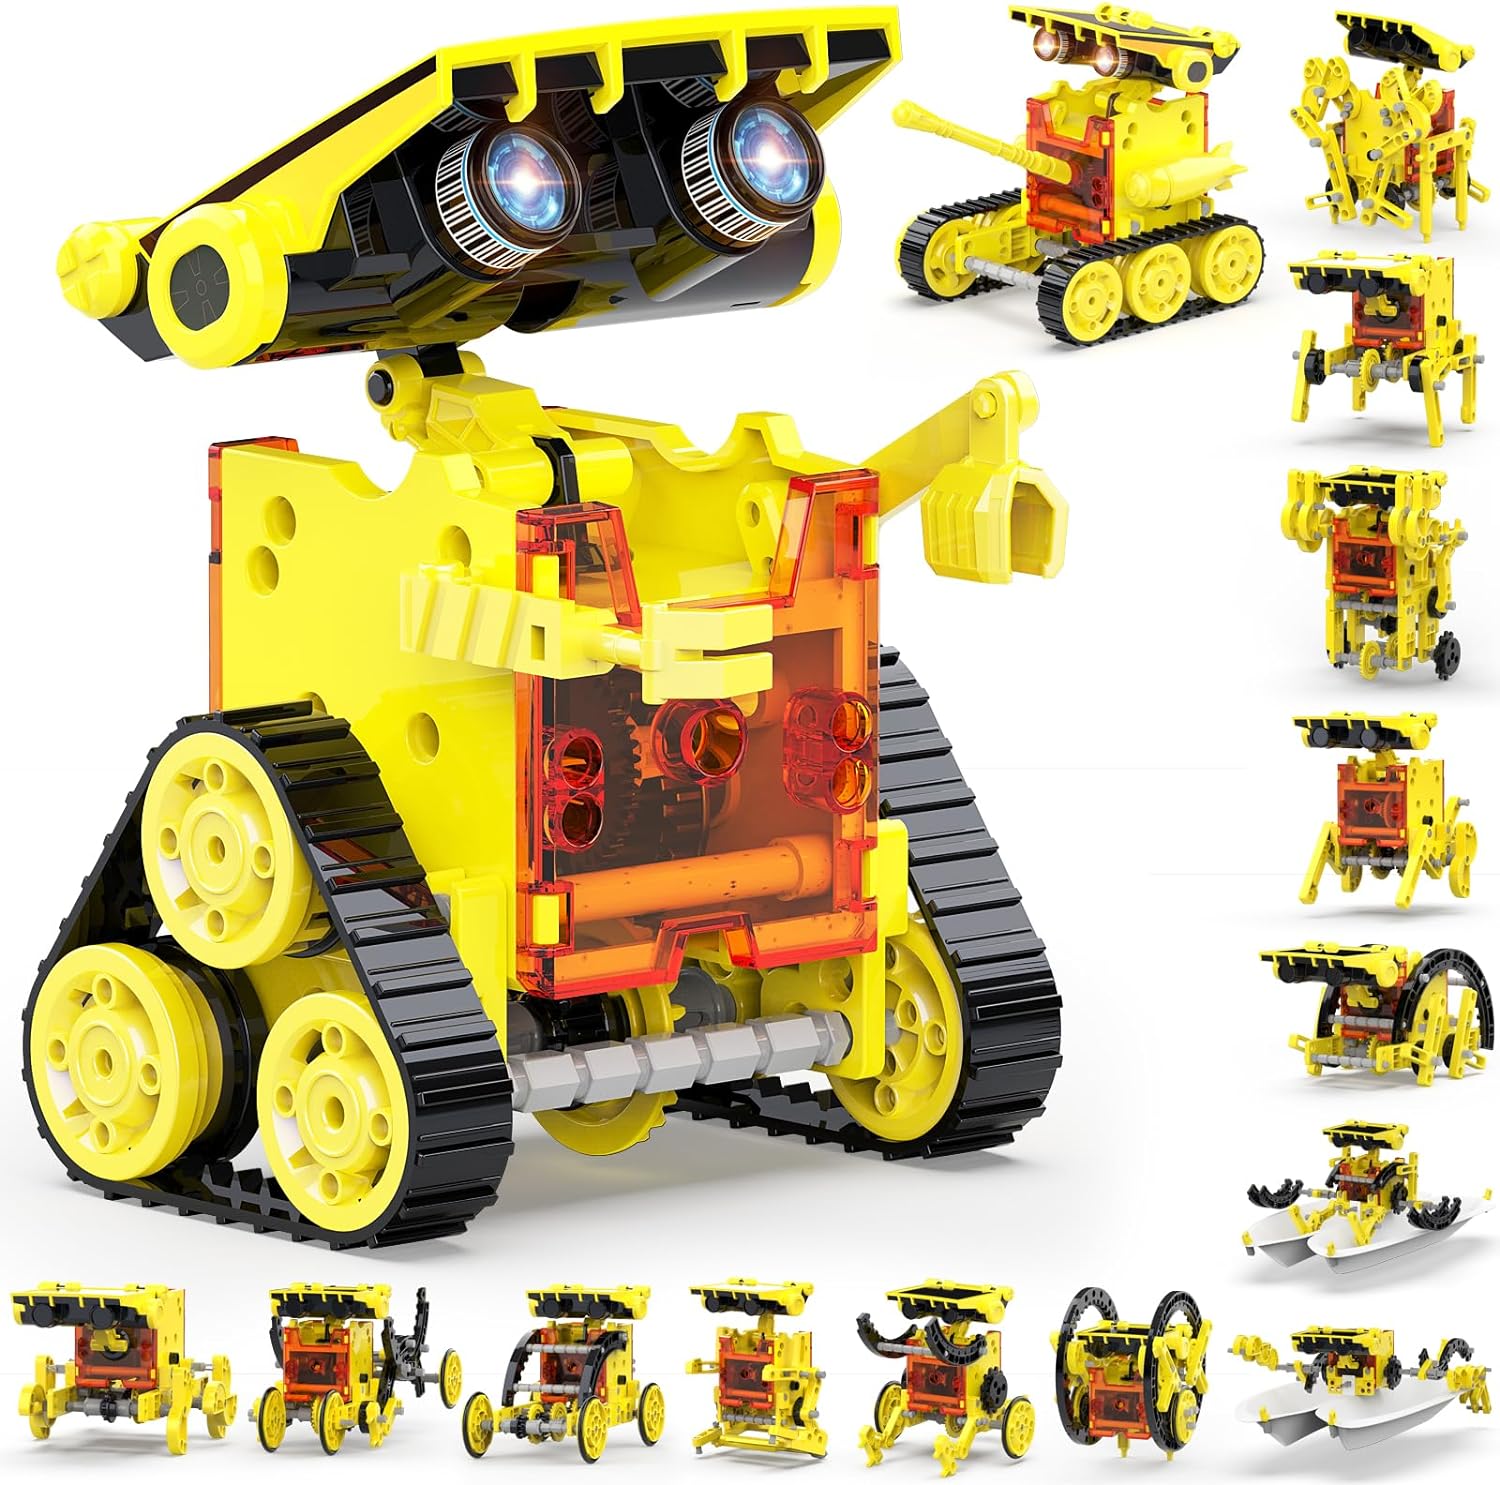 I ordered this for my daughter. She was given a small lego kit for her birthday and really liked it. So got her this because I thought she would like building and also seeing the robot go. And the fact that this has multiple robots she can build different things. It' allowing her to follow instructions and being very patient doing it. Using her hands and it' keeping her busy. Prefer it over screen time. She loves this. Great stem toy and good price.